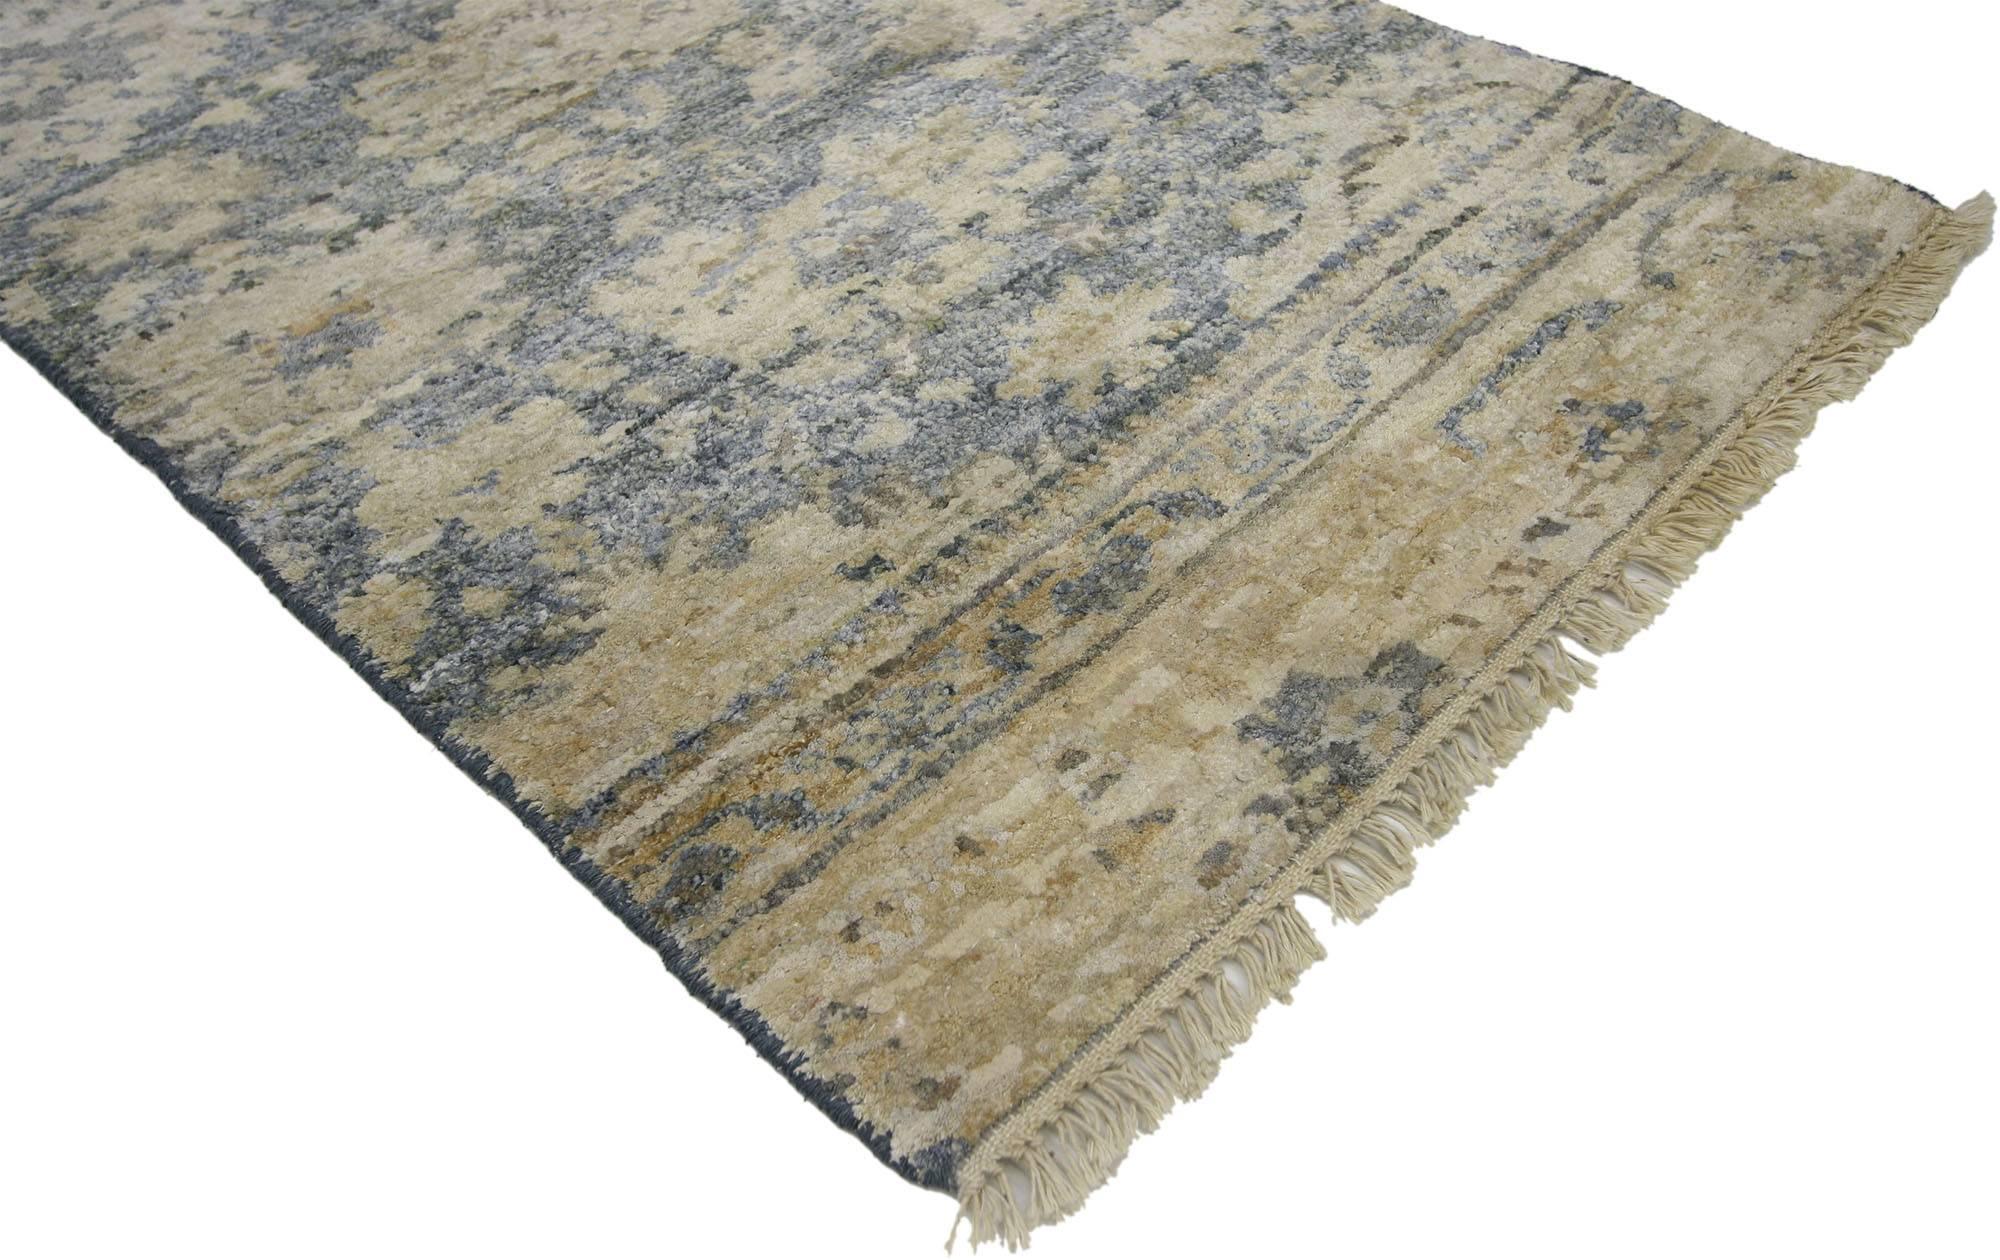 30368 New Contemporary Oushak Style Accent Rug with Modern Style 02'00 x 03'00. This contemporary Oushak style accent rug features a modern traditional style in variegated shades of sky blue, slate blue, tan, beige and creamy vanilla. Polished and